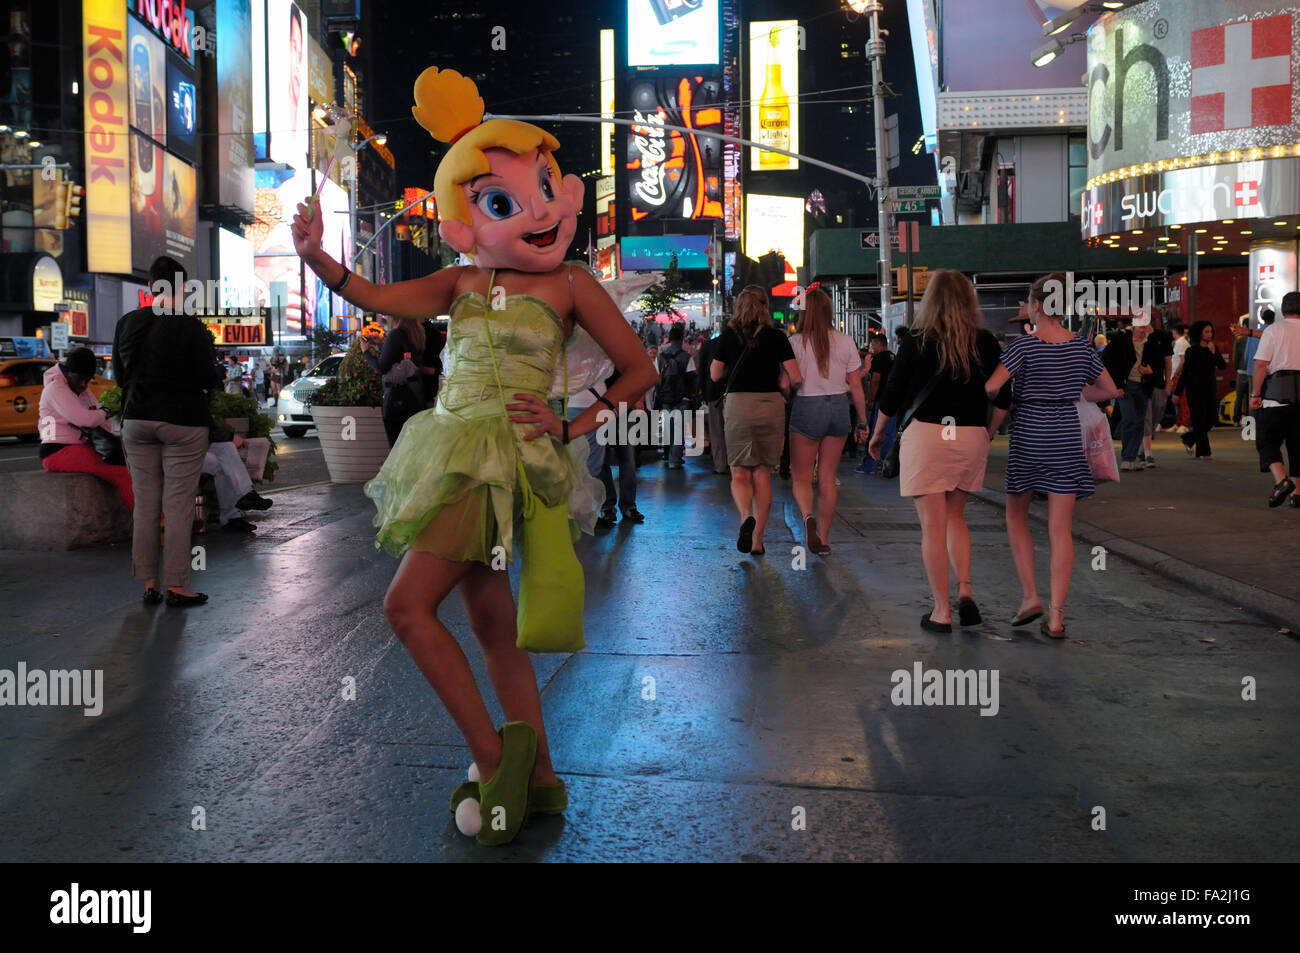 Tinkerbell nachts am Times Square, New York. Stockfoto